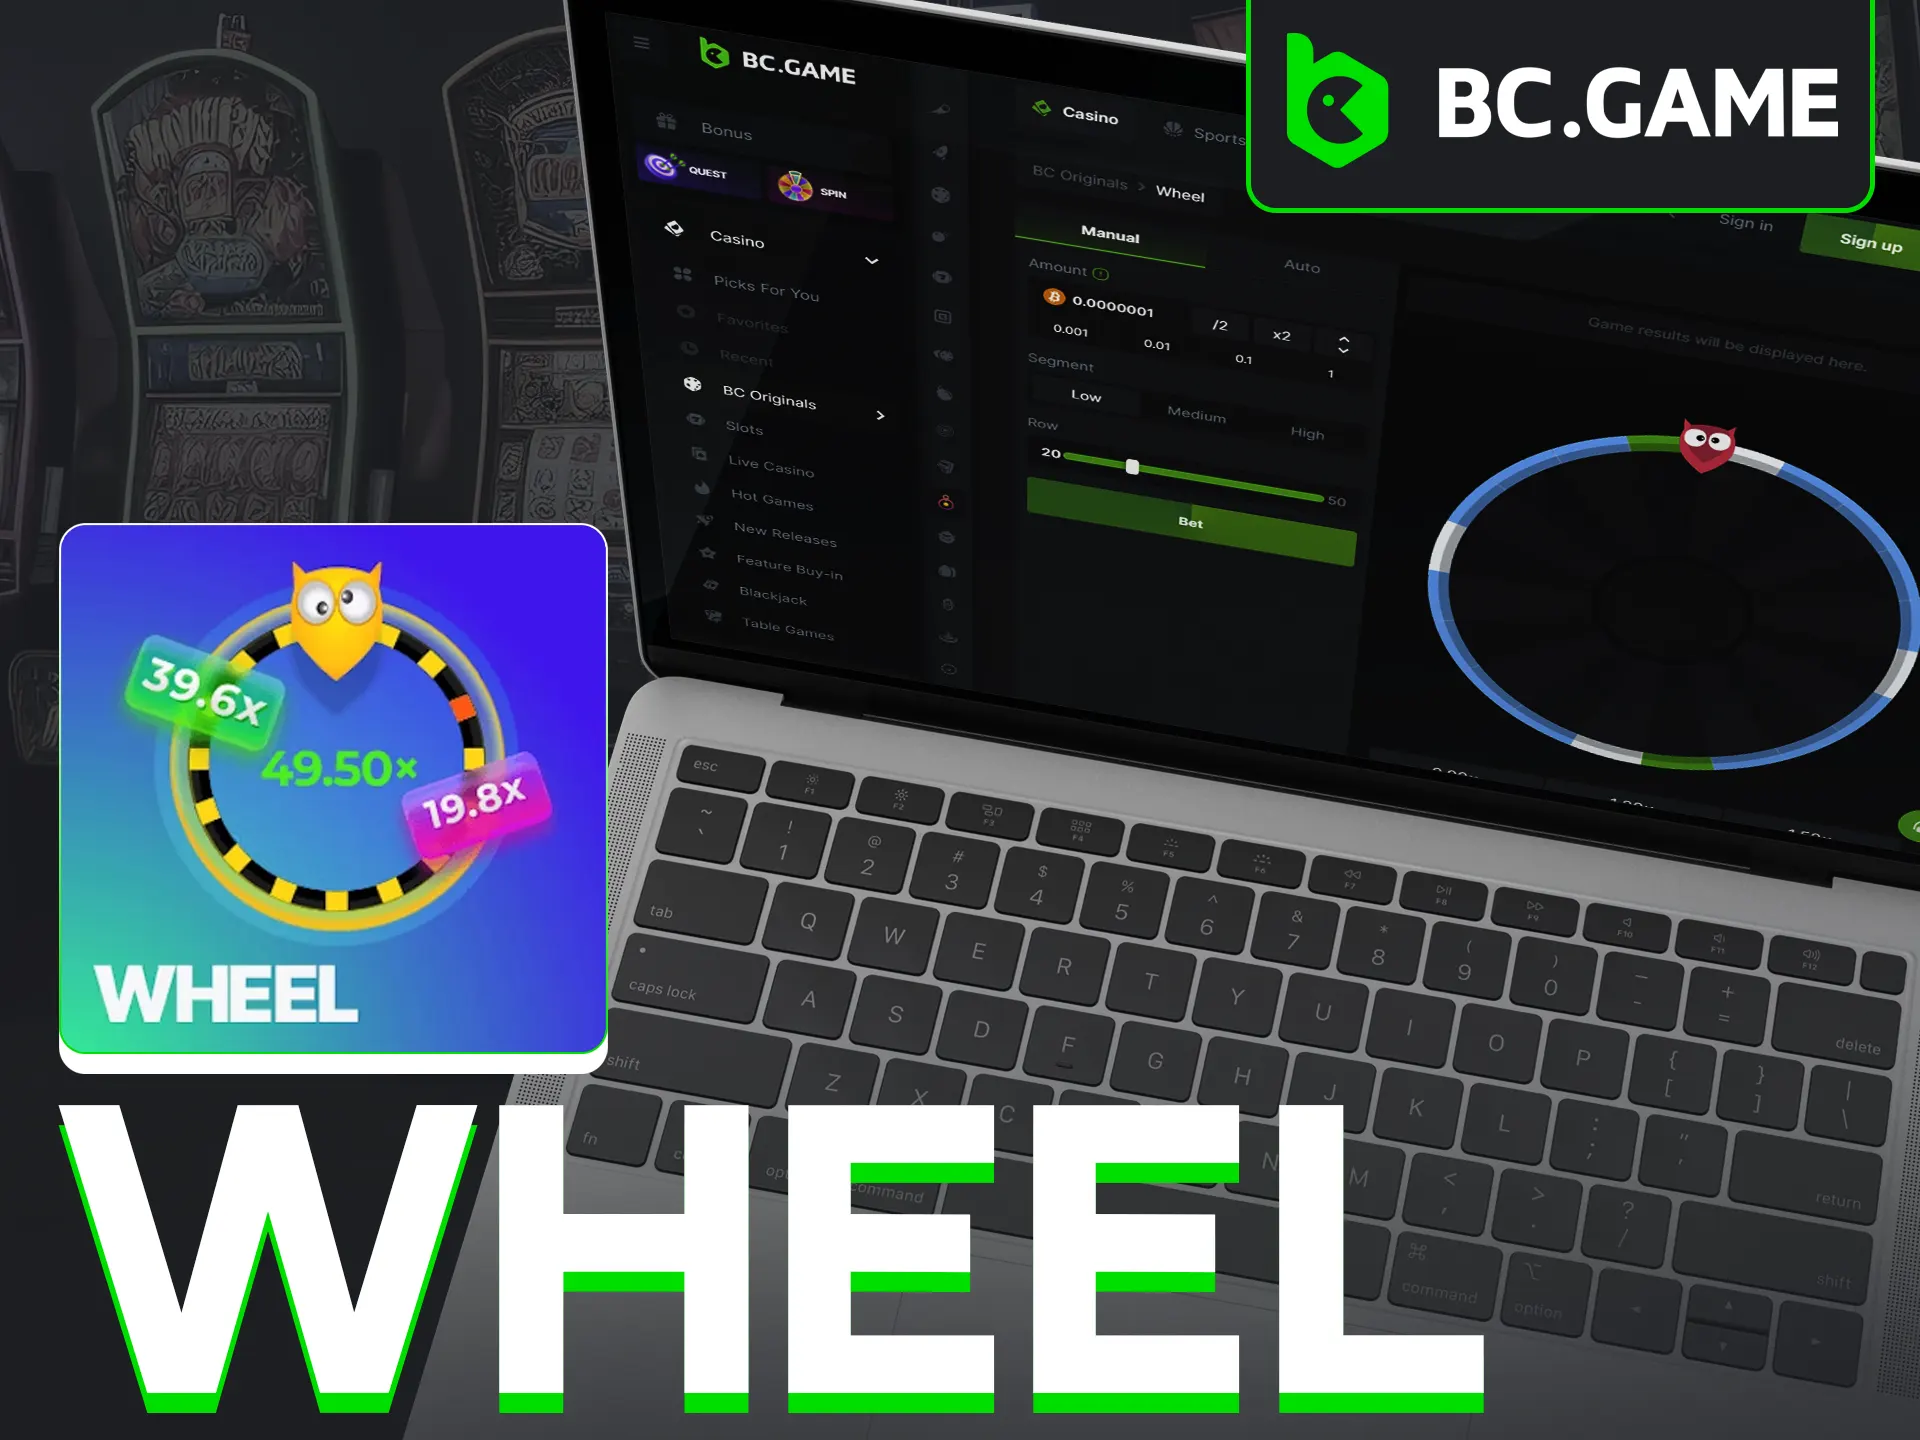 Spin Wheel in BC Game for various rewards, based on luck.